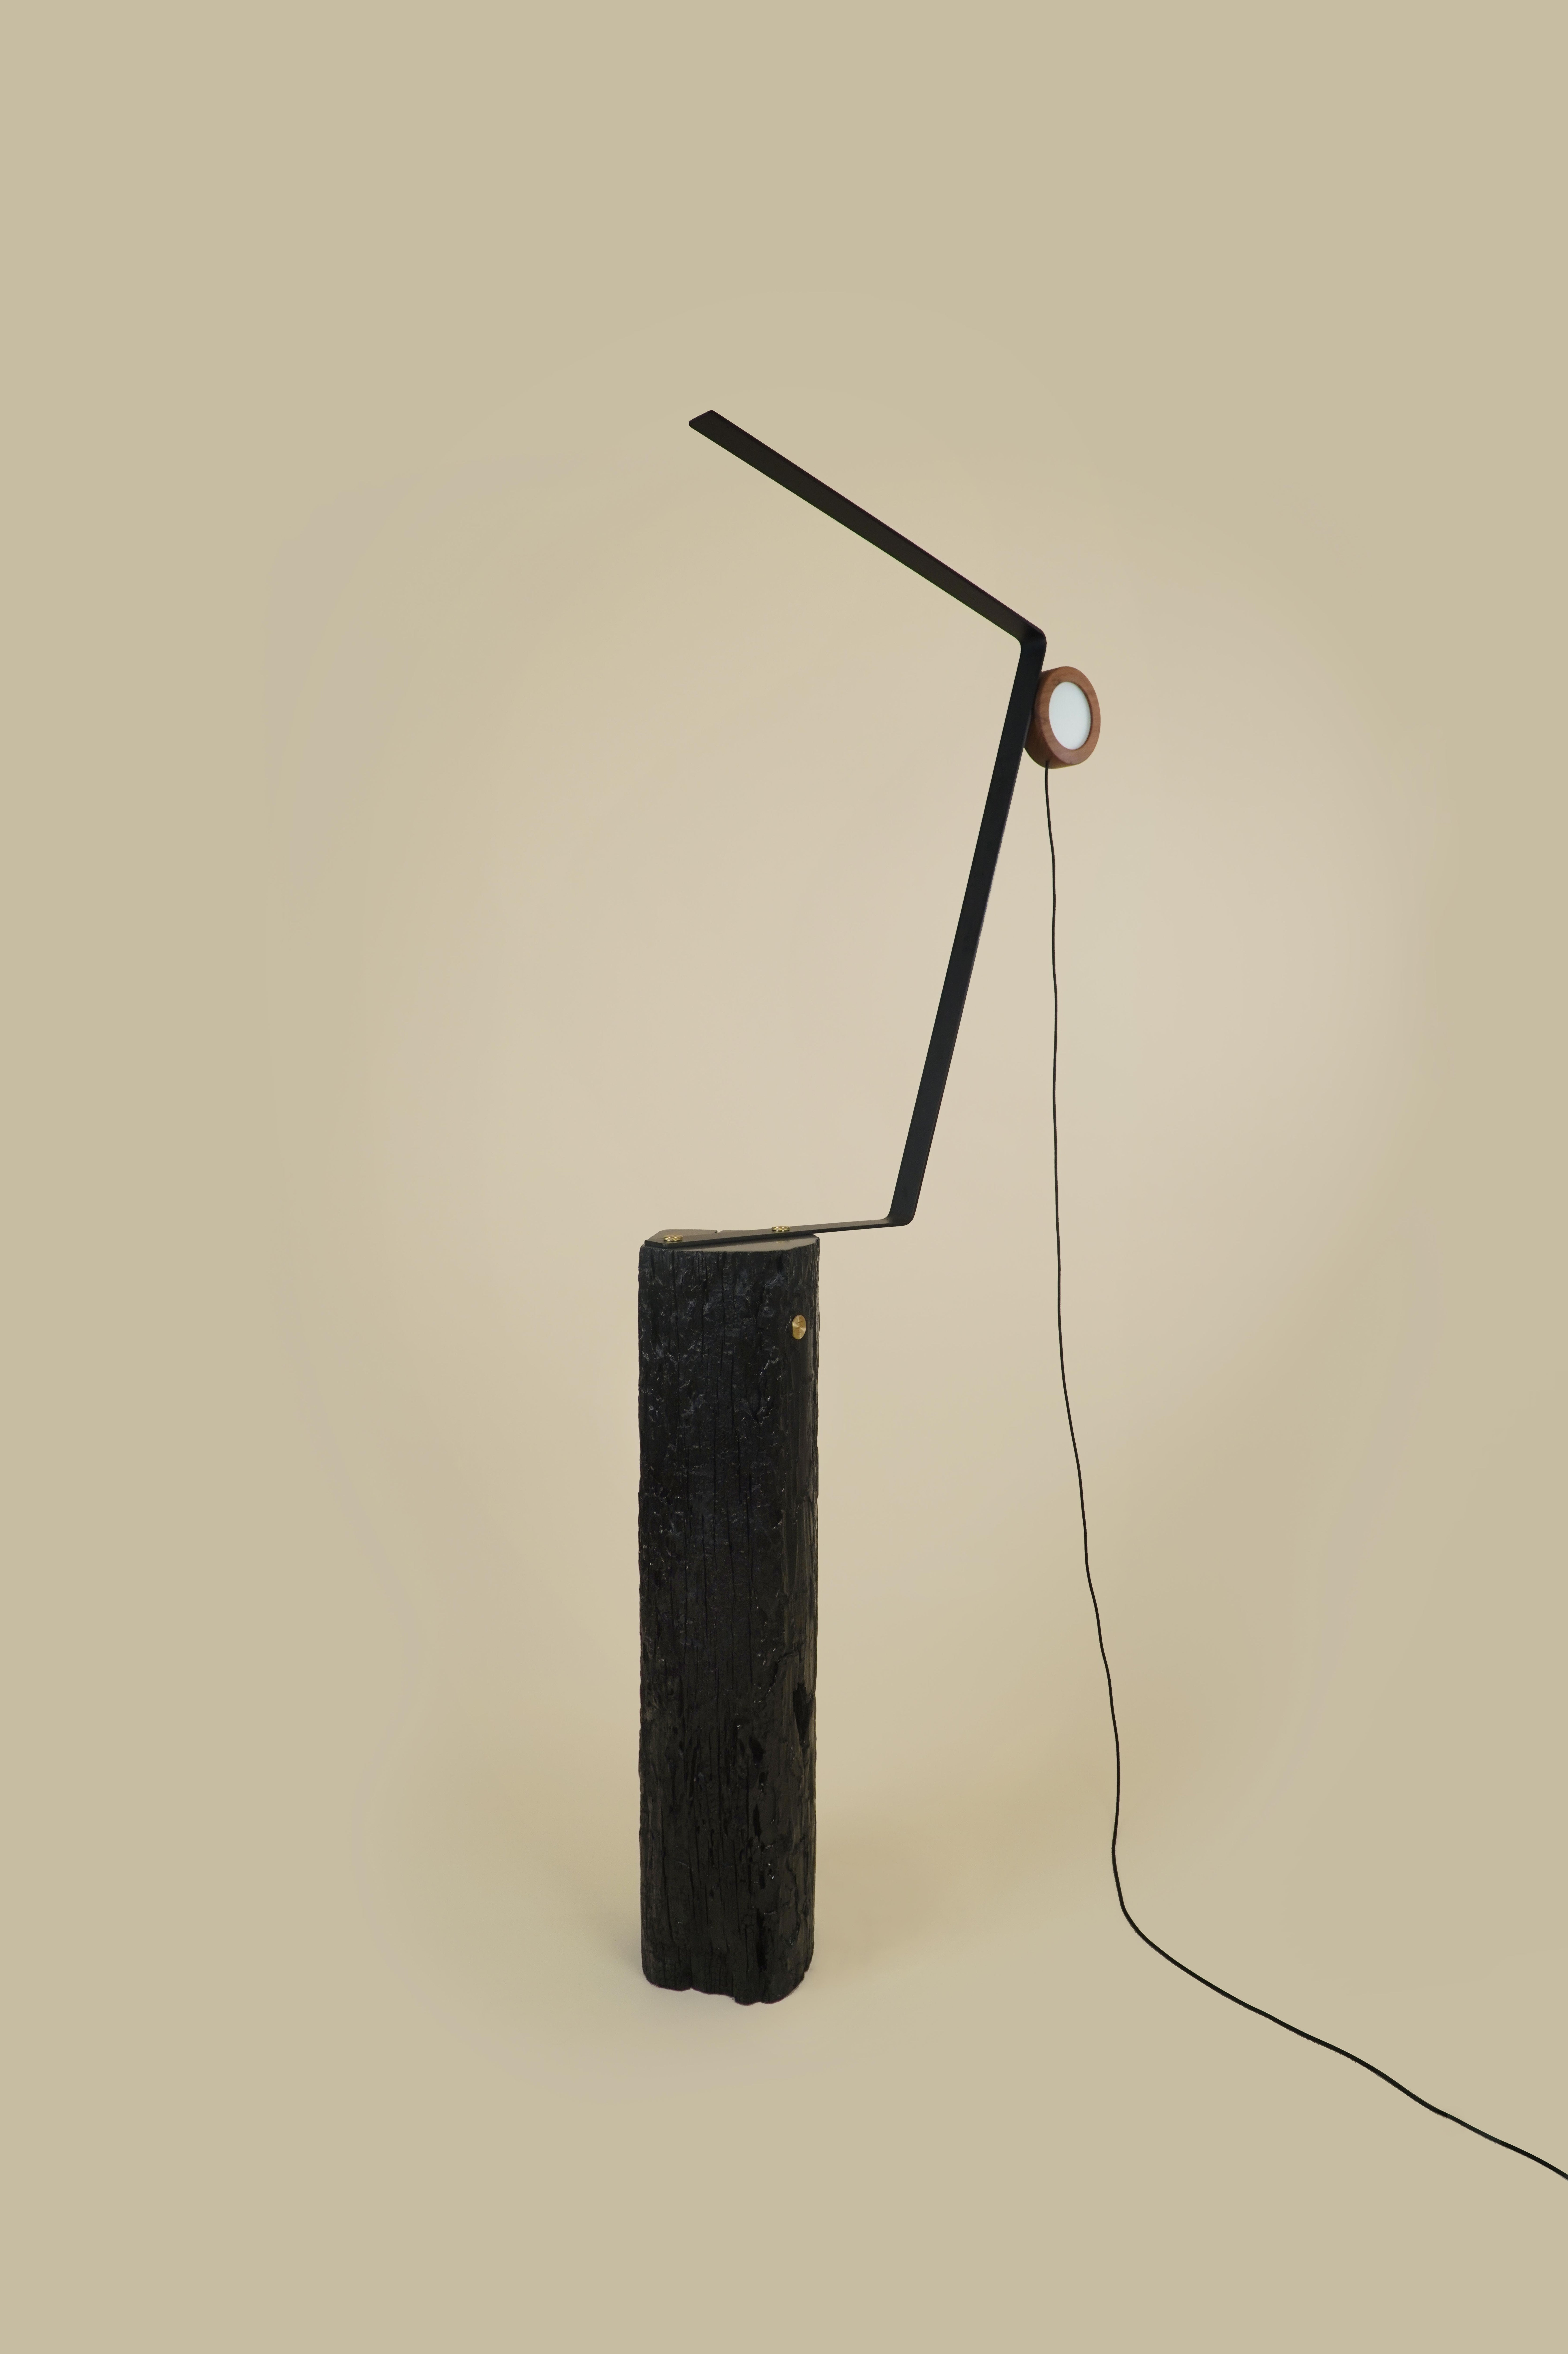 About the Lamp:

Reentrâncias is a Floor Lamp designed to enhance the beauty of its materials and tell the stories of its process. 

It has a strong LED panel of 9W being extremely useful for enlightening spaces also because it has magnets built